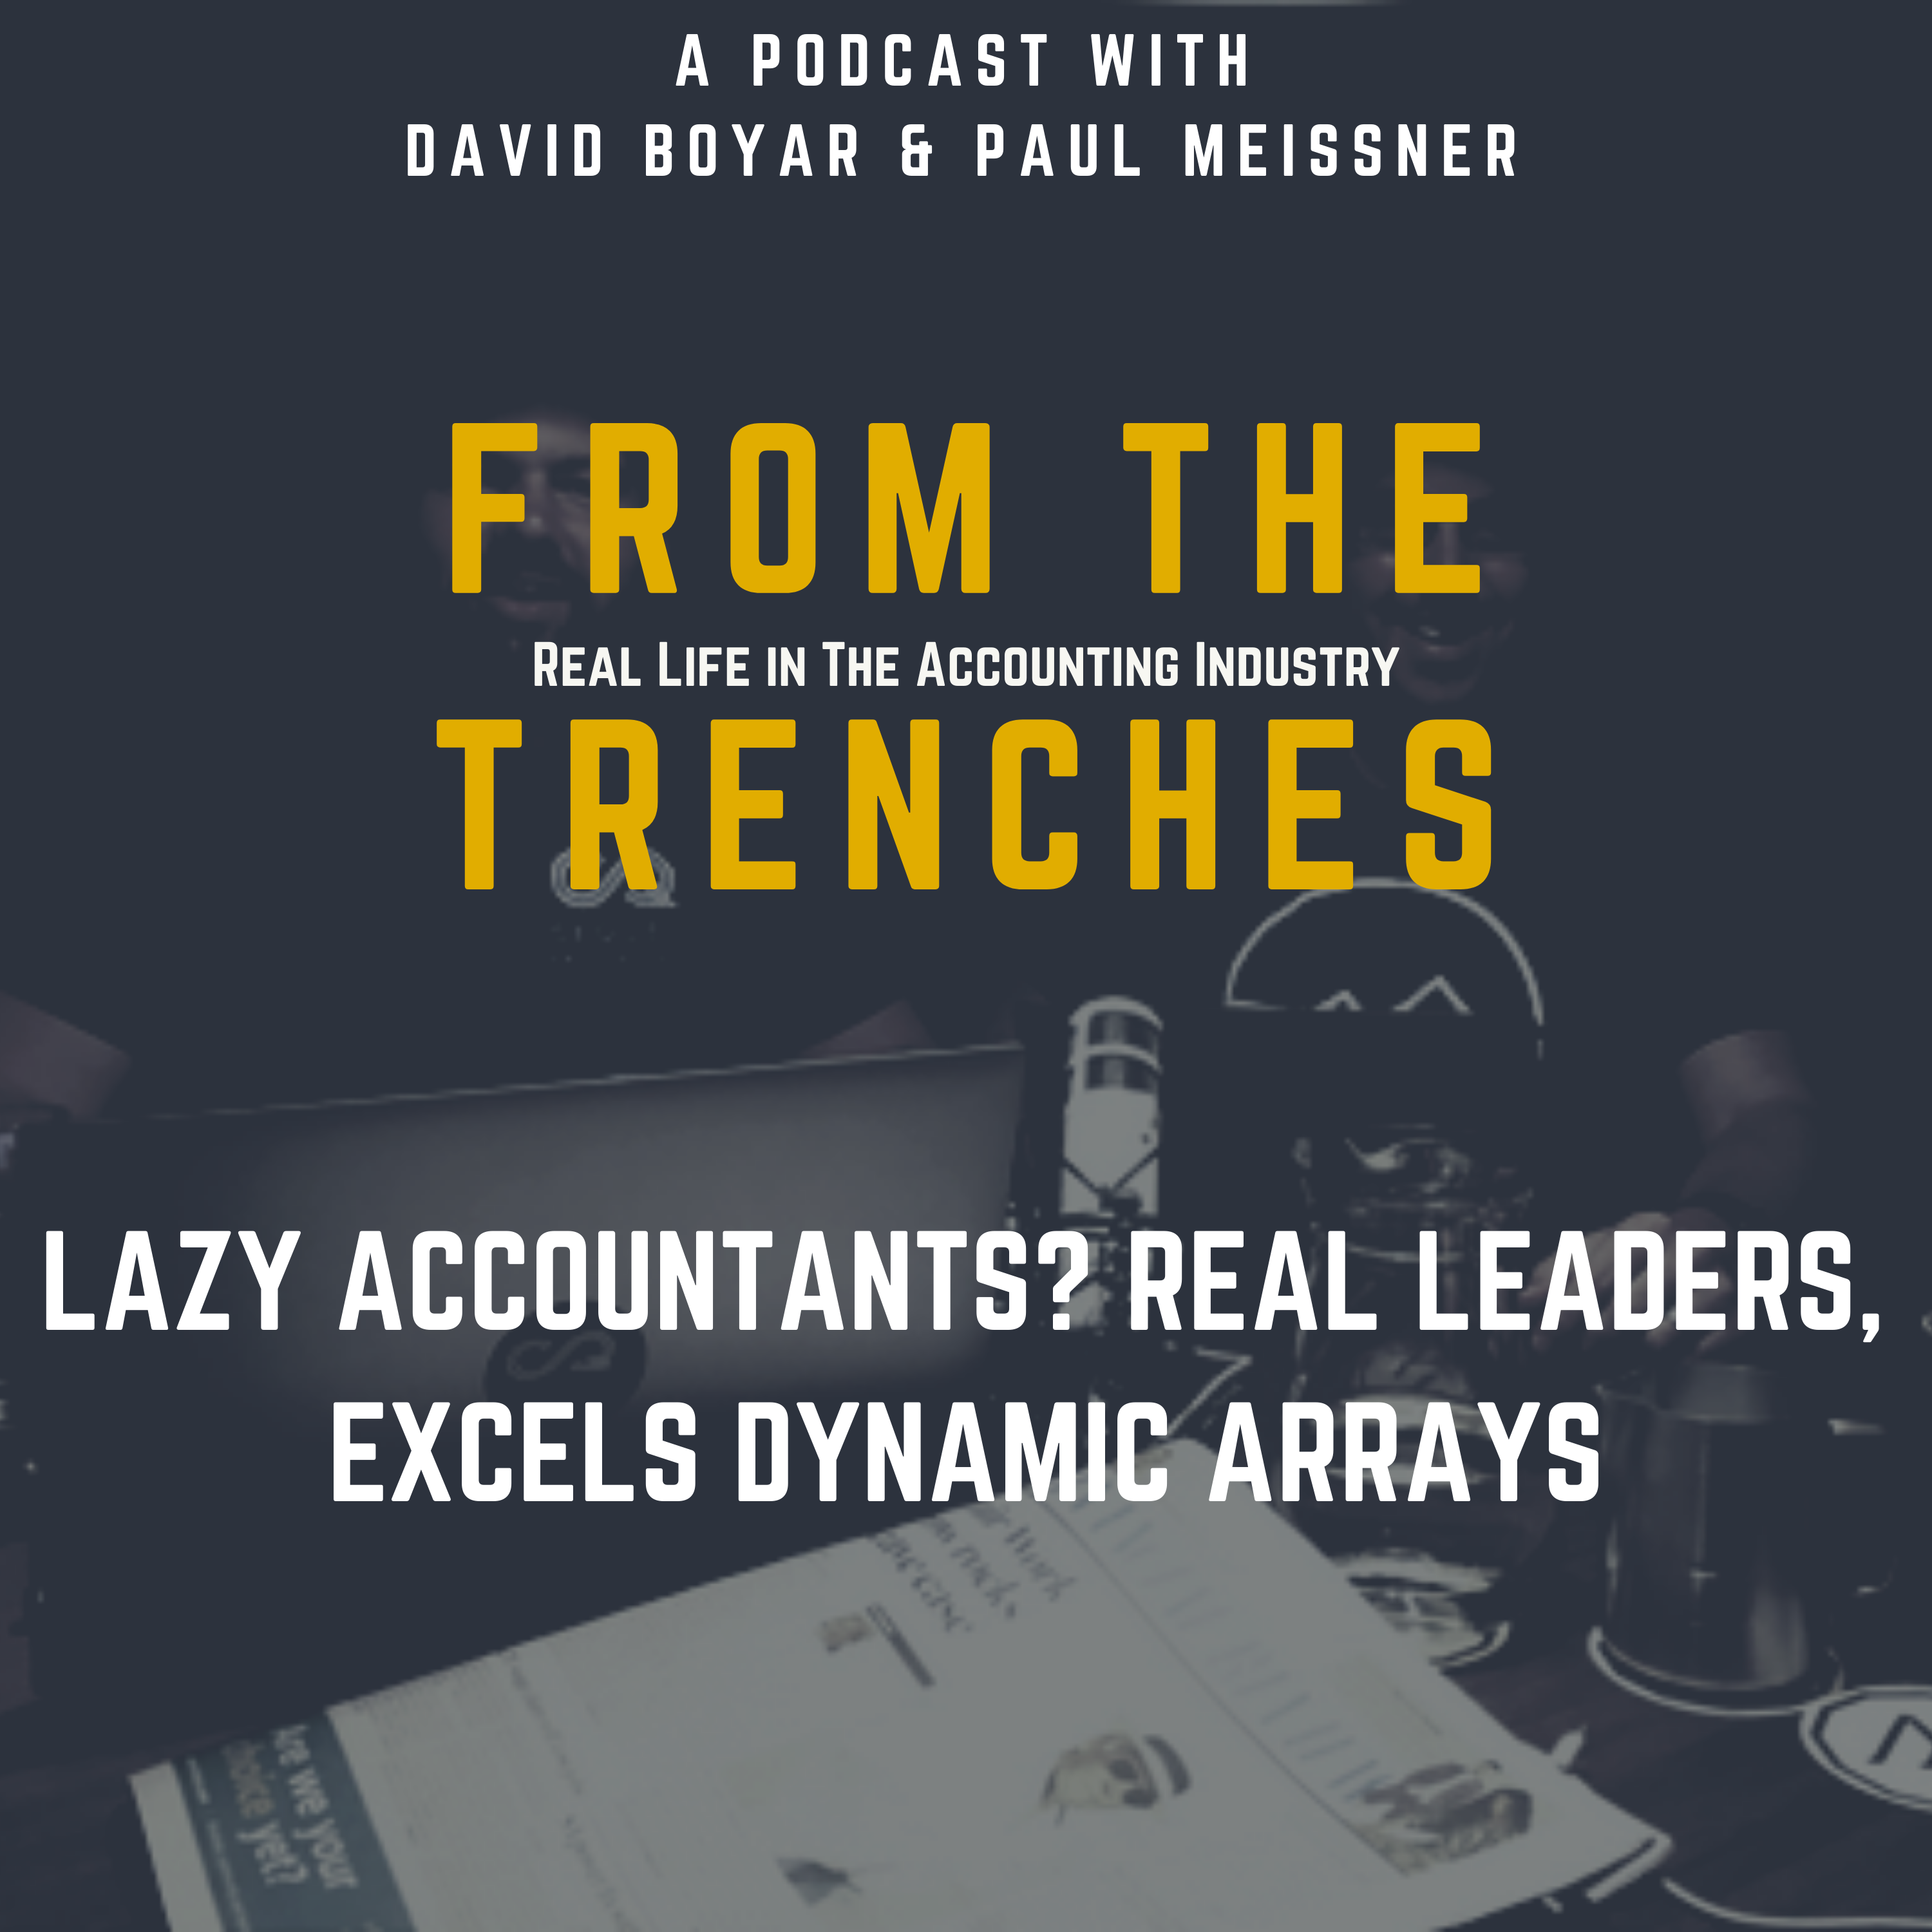 Lazy Accountants? Real Leaders, Excels Dynamic Arrays